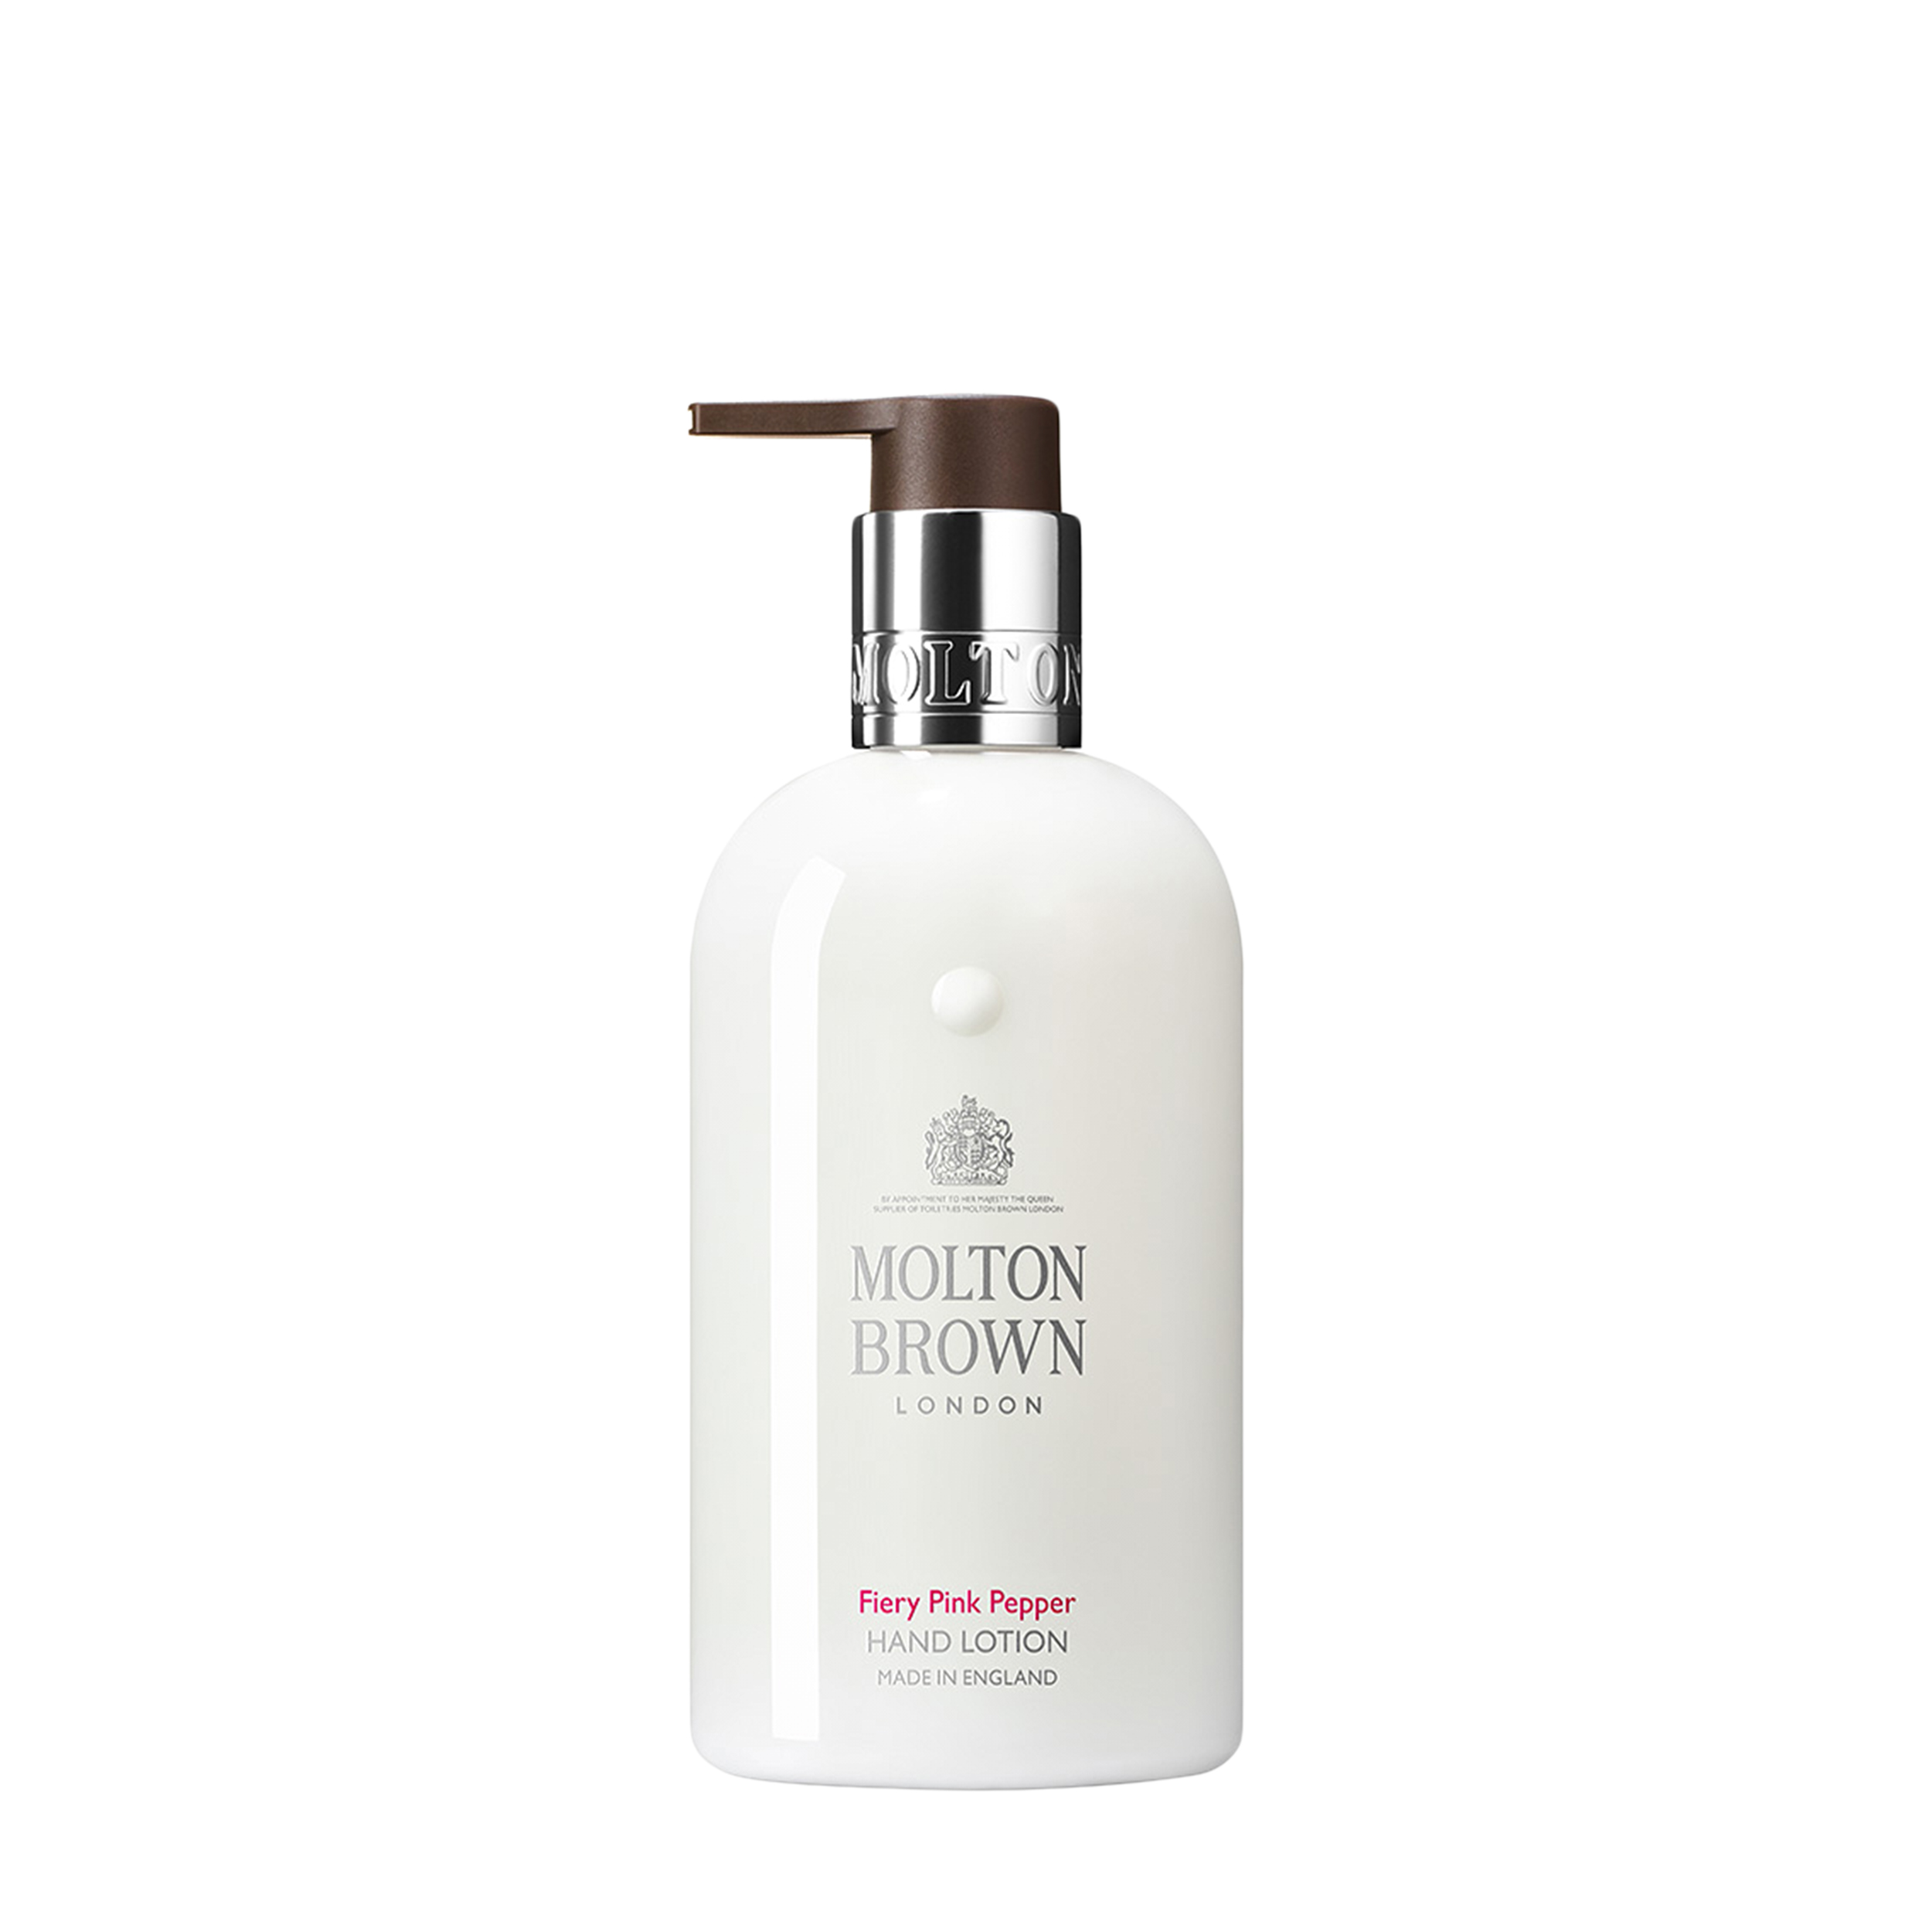 Molton Brown Molton Brown Лосьон для рук Fiery Pink Pepper Hand Lotion 300 мл